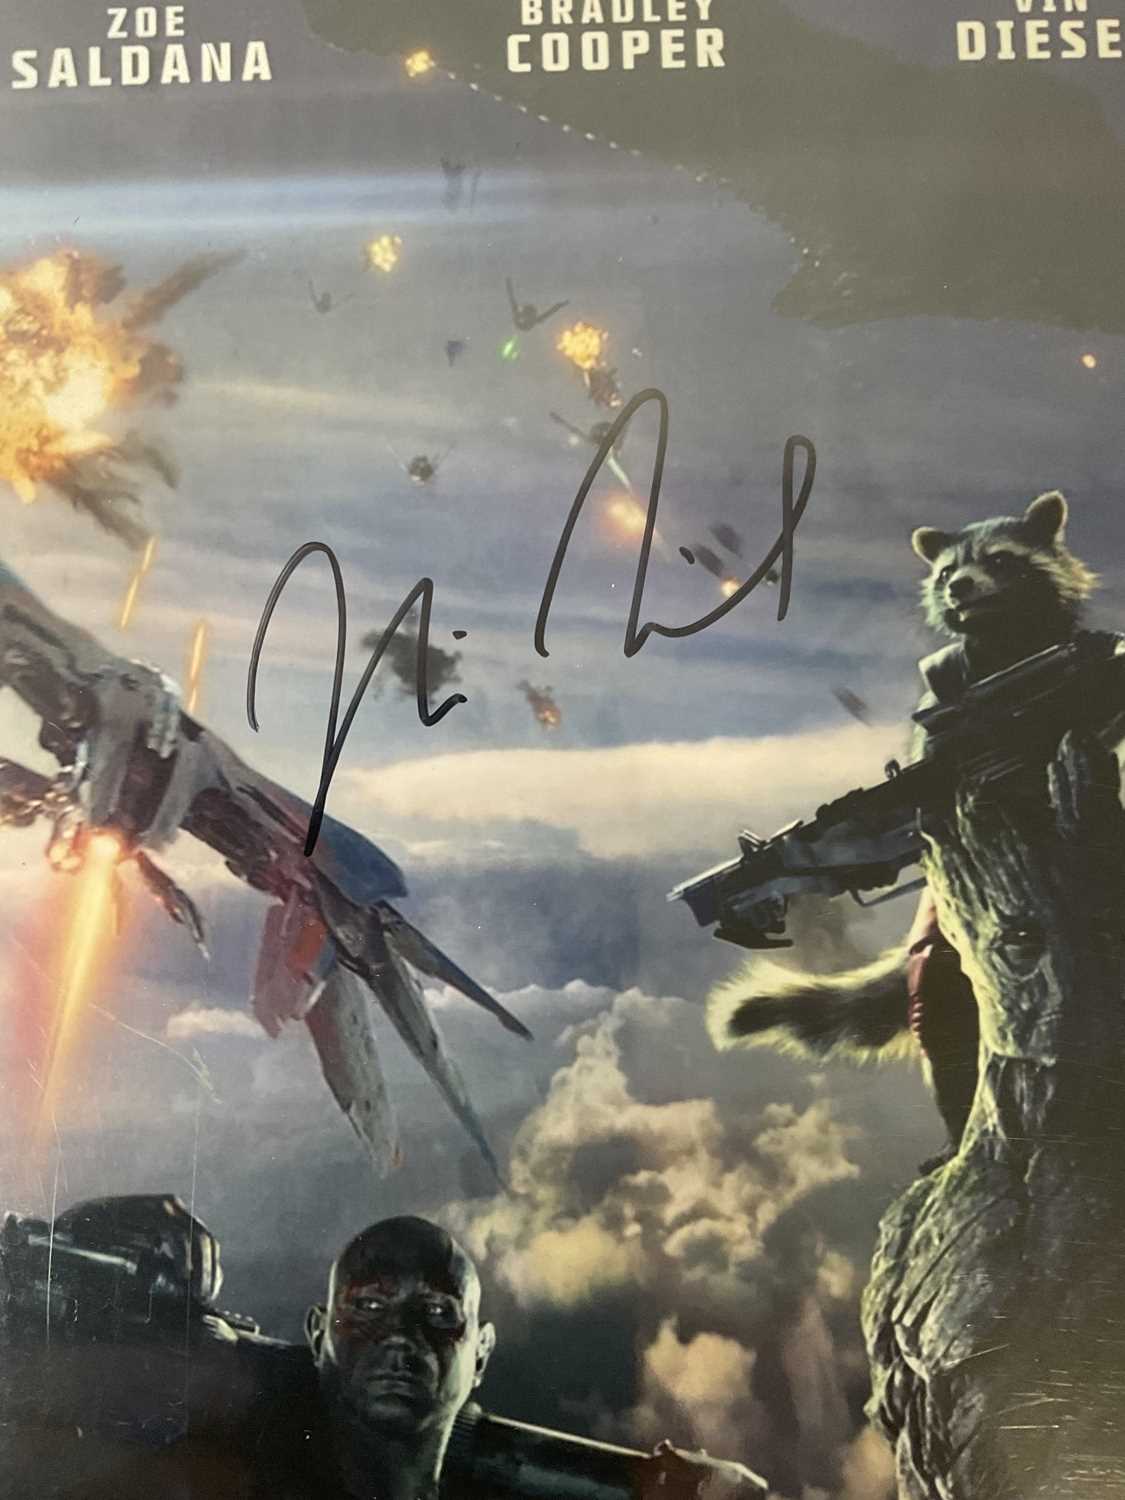 A mini poster for Guardians of the Galaxy signed by VIN DIESEL who voices Groot in the movies. - Image 2 of 2